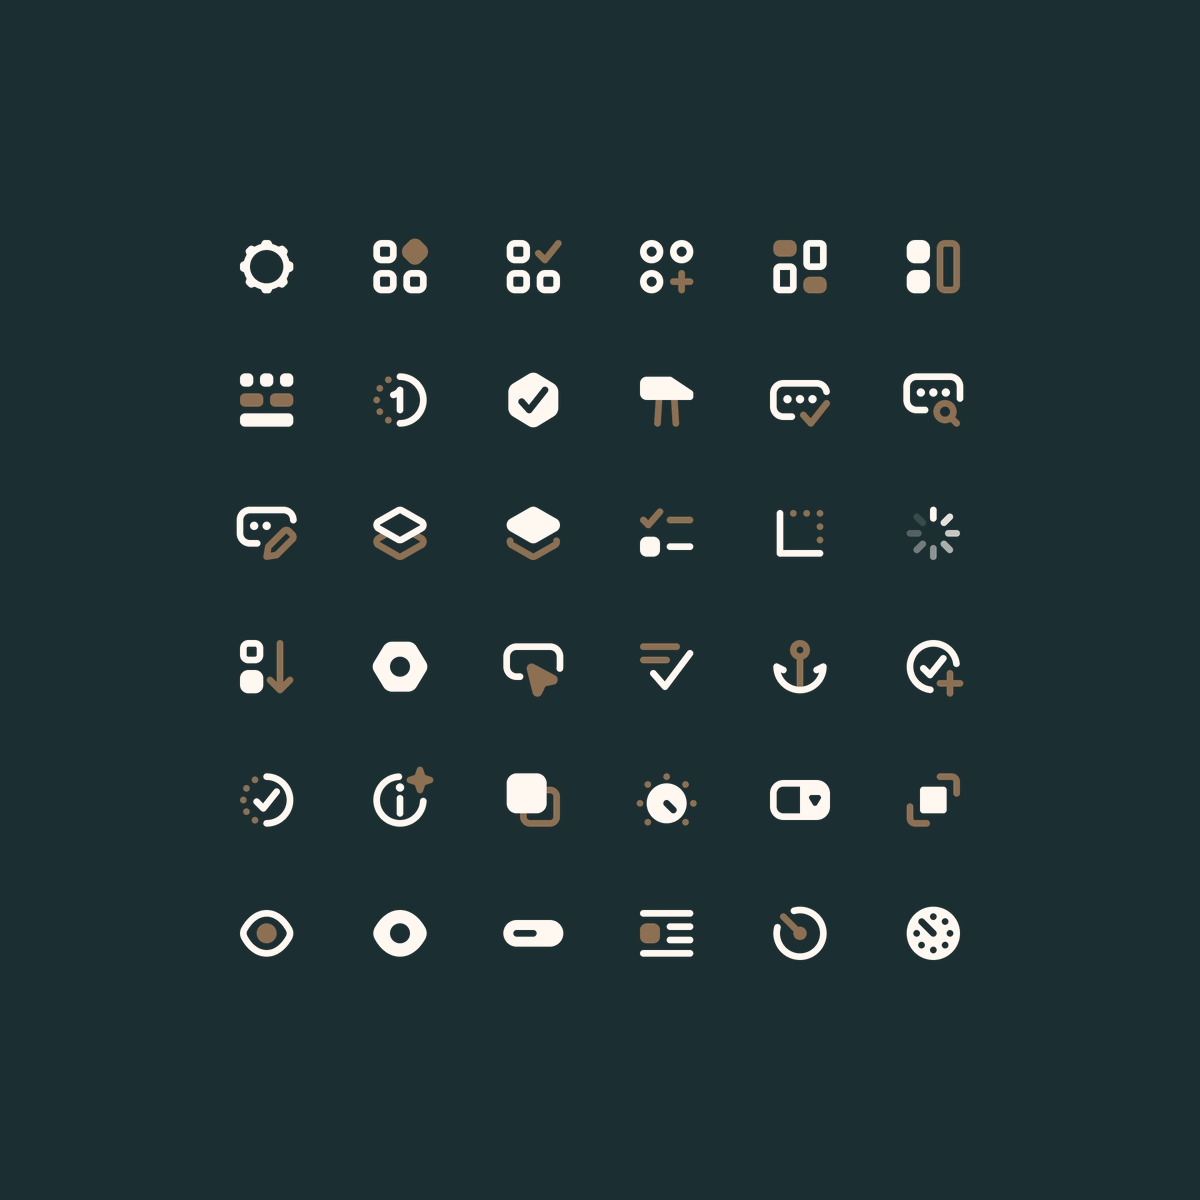 ☑️ Just completed the first 200 icons! When we reach 1000, this new icon family will be available to all those who purchased Nucleo UI or Core.